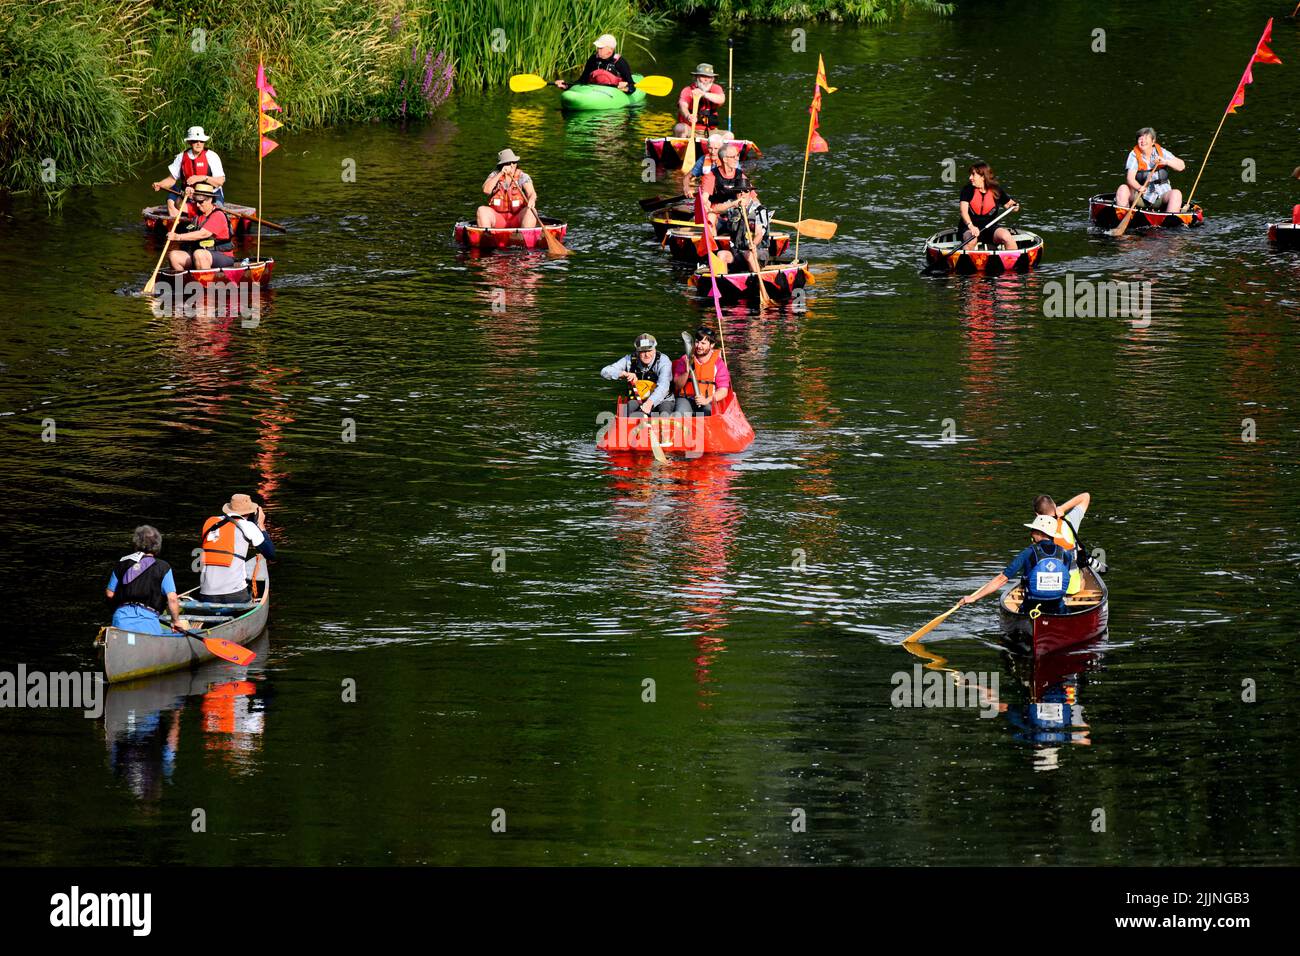 Queen's Baton Relay. The Commonwealth Games Queen's Baton Relay passing through Ironbridge in Shropshire. The baton travelled by coracle on the River Stock Photo